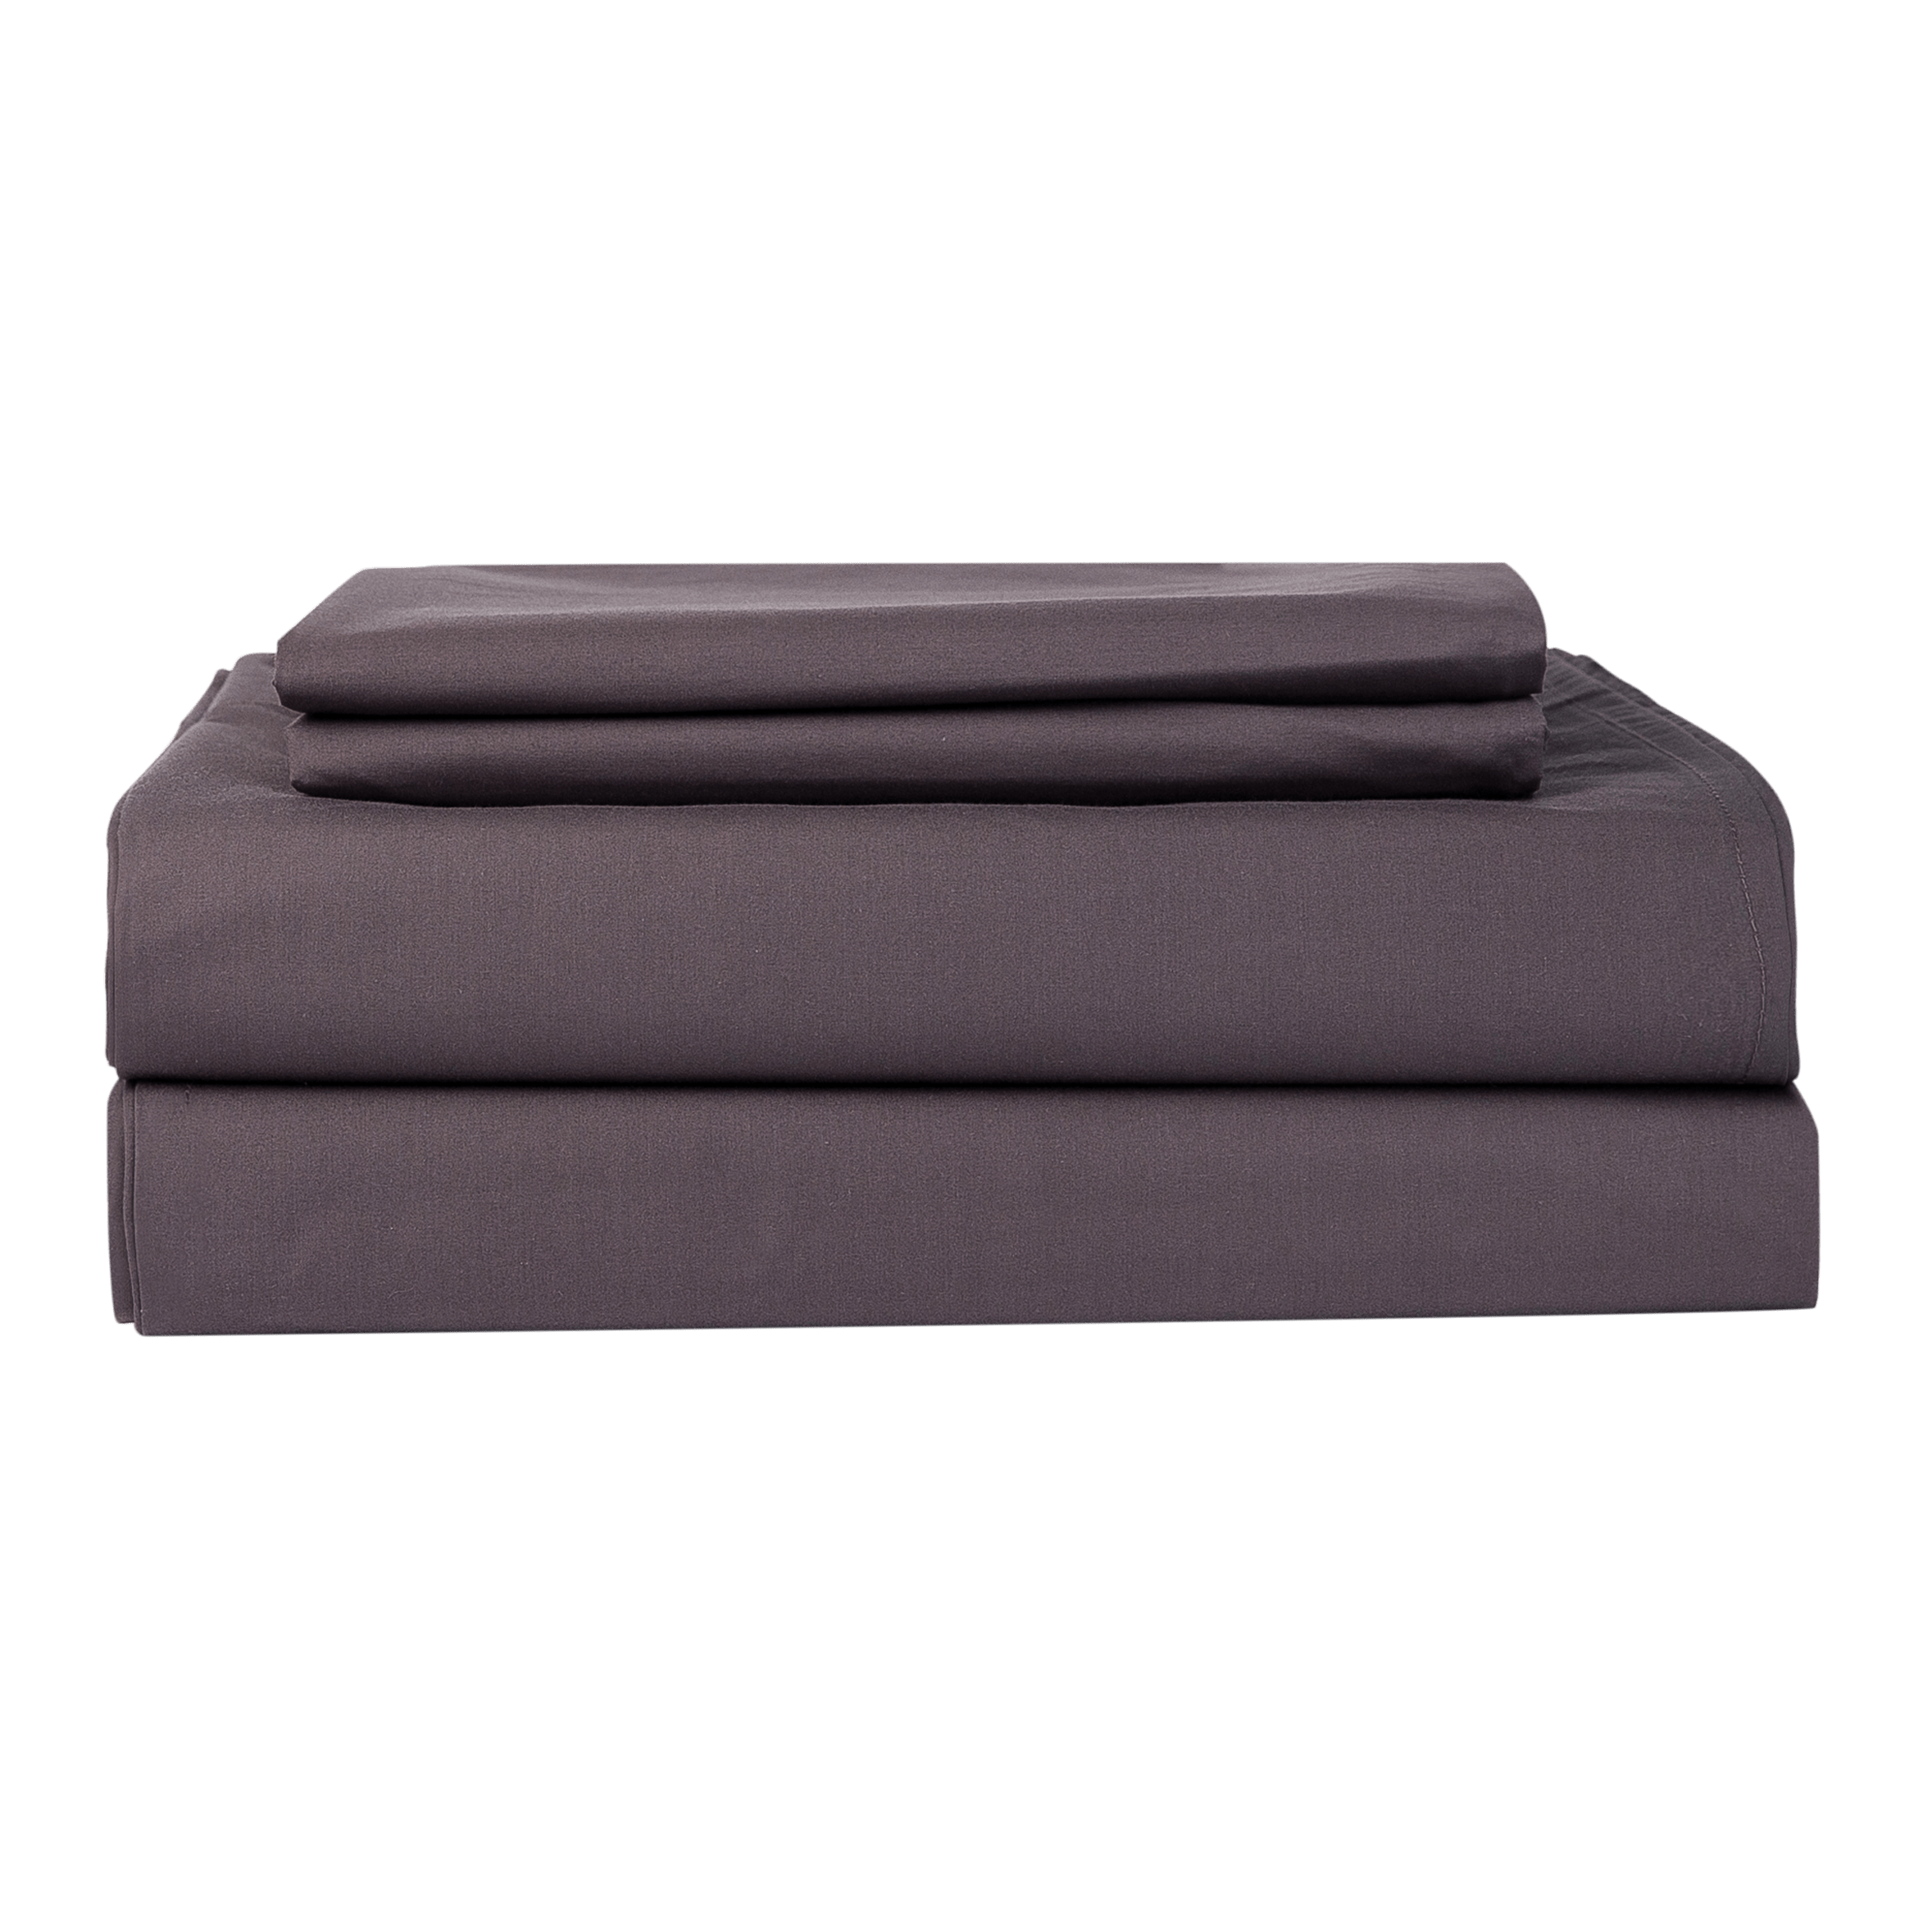 Essential Collection Percale Sheet set in Charcoal which includes 1 flat sheet, 1 fitted sheet and 2 pillowcases